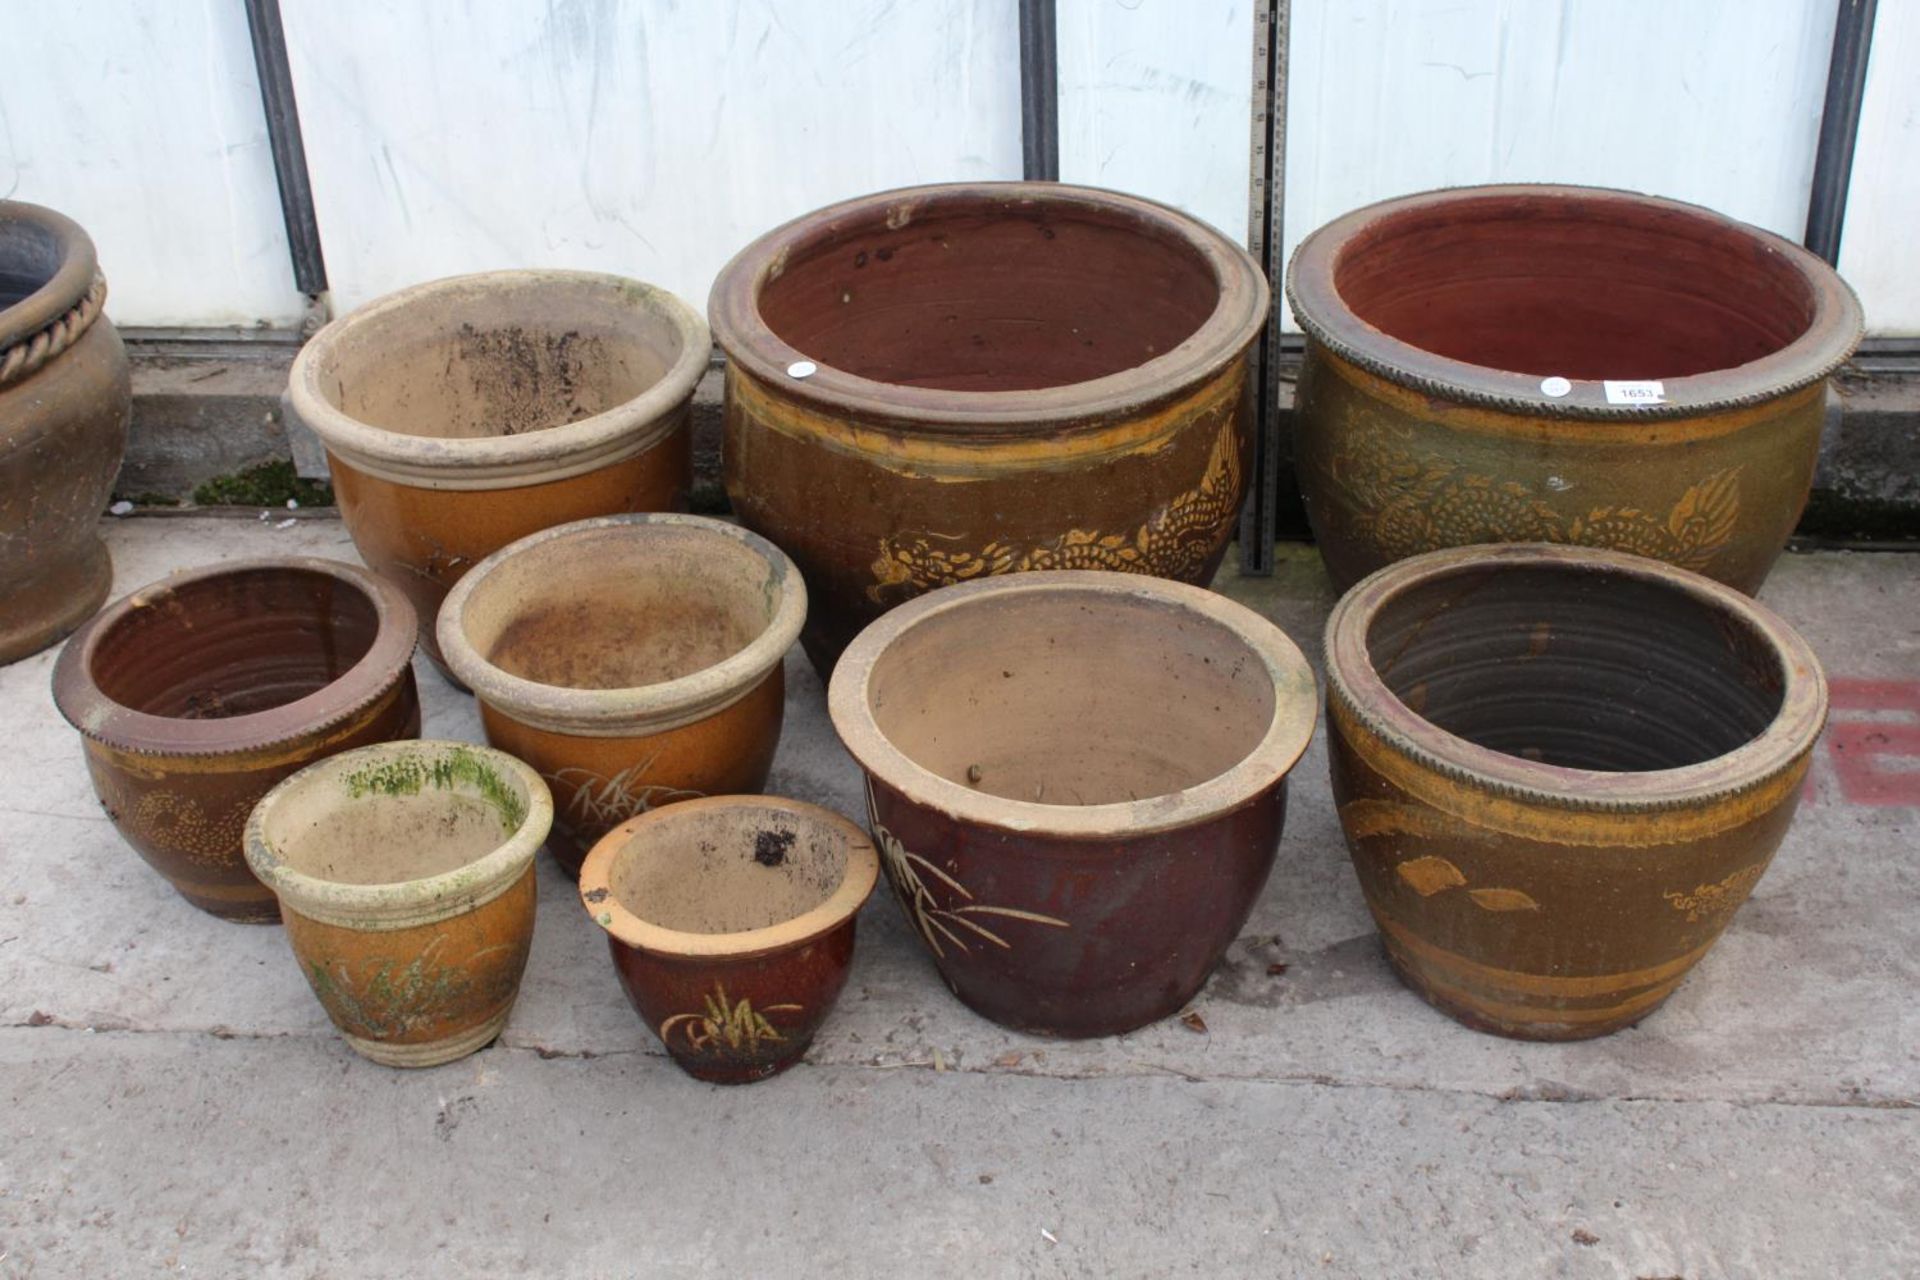 AN ASSORTMENT OF VARIOUS SIZED BROWN GLAZED GARDEN POTS, SOME DEPICTING DRAGONS